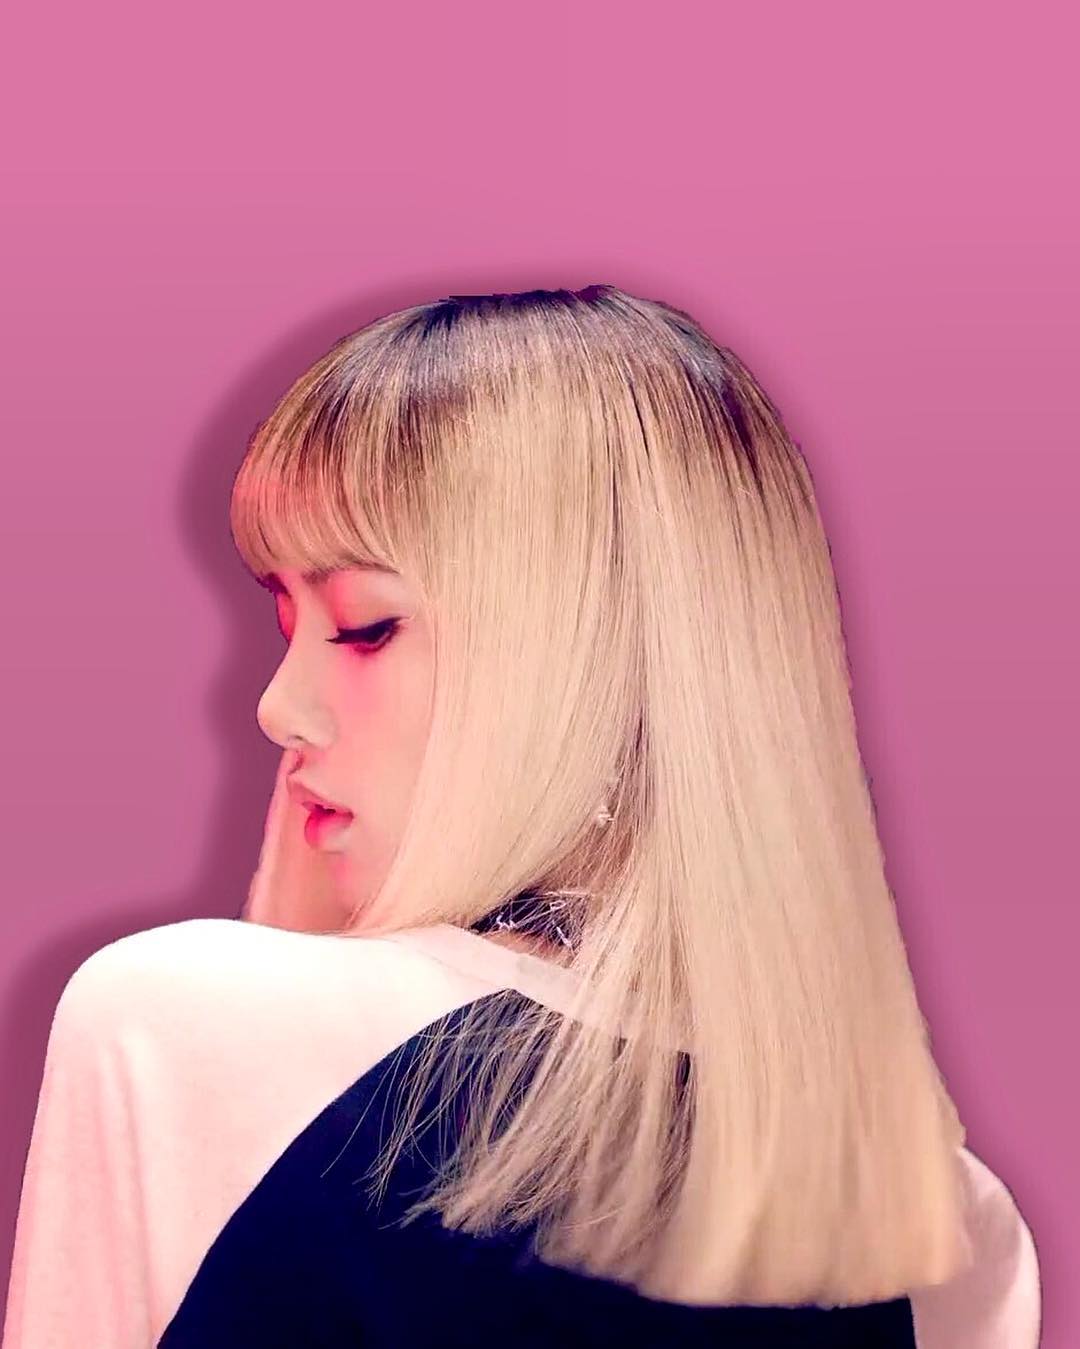 Blackpink - Lisa Cutest Wallpapers | TheWaoFam Wallpapers | TheWaoFam